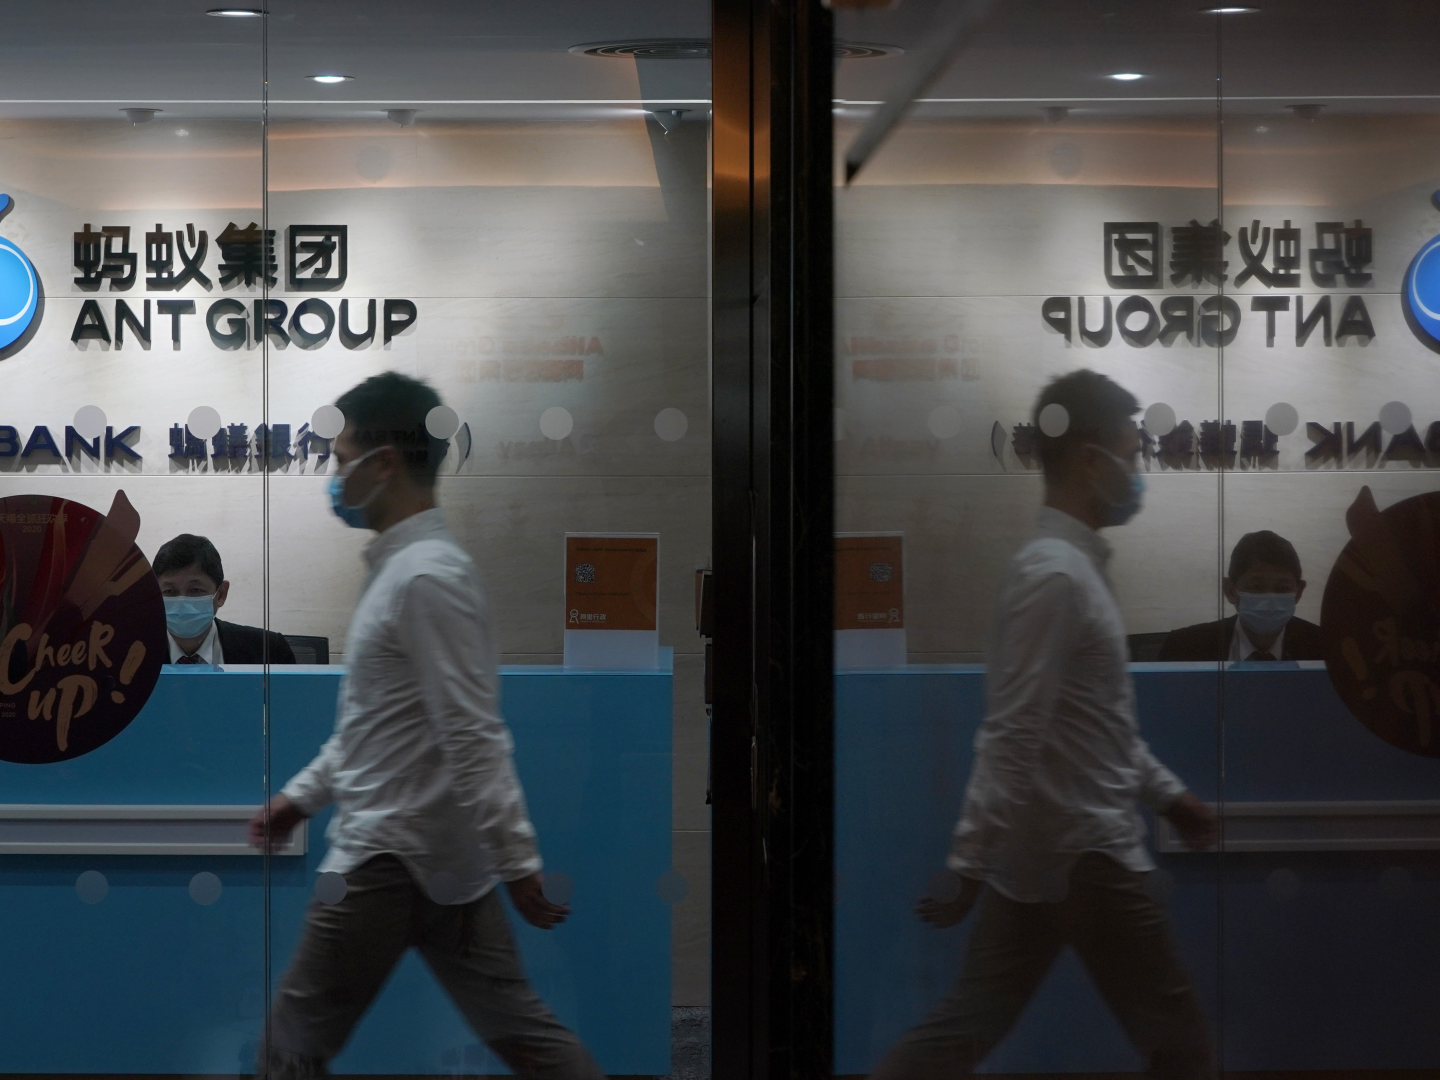 Das Ant Group Büro in Hong Kong | Foto: picture alliance / AP Photo